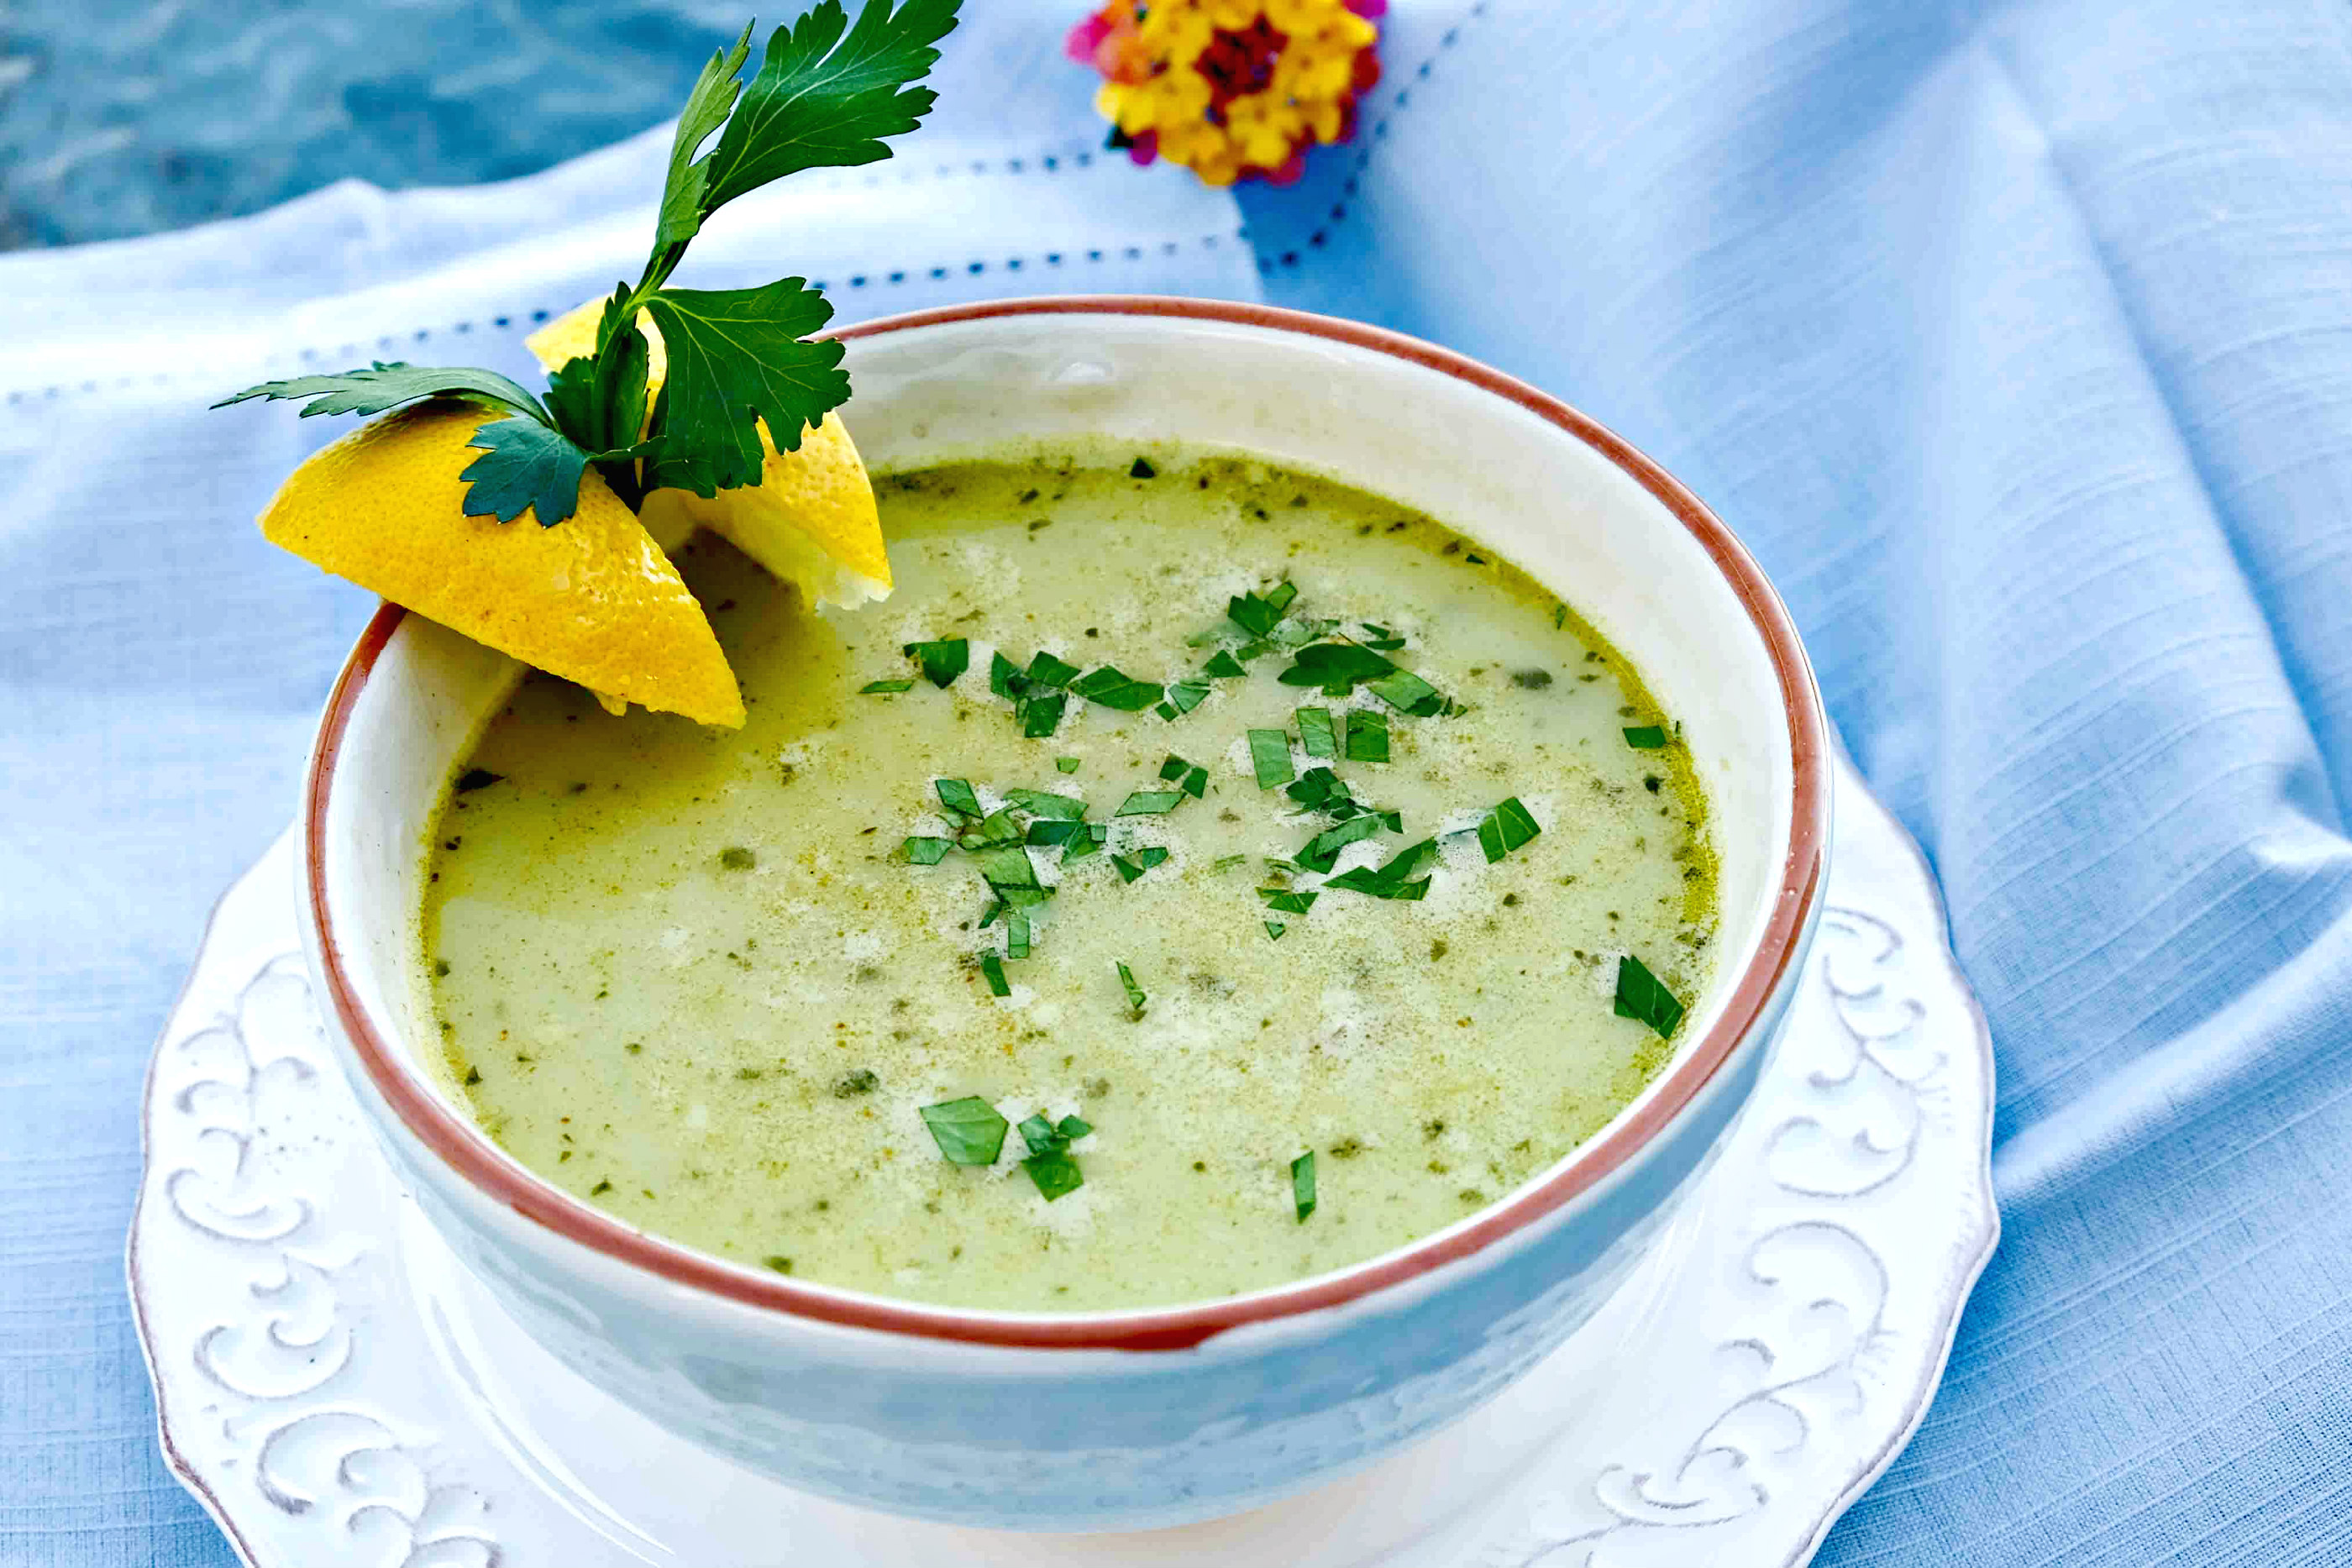 chickpea parsley soup, immune boosting